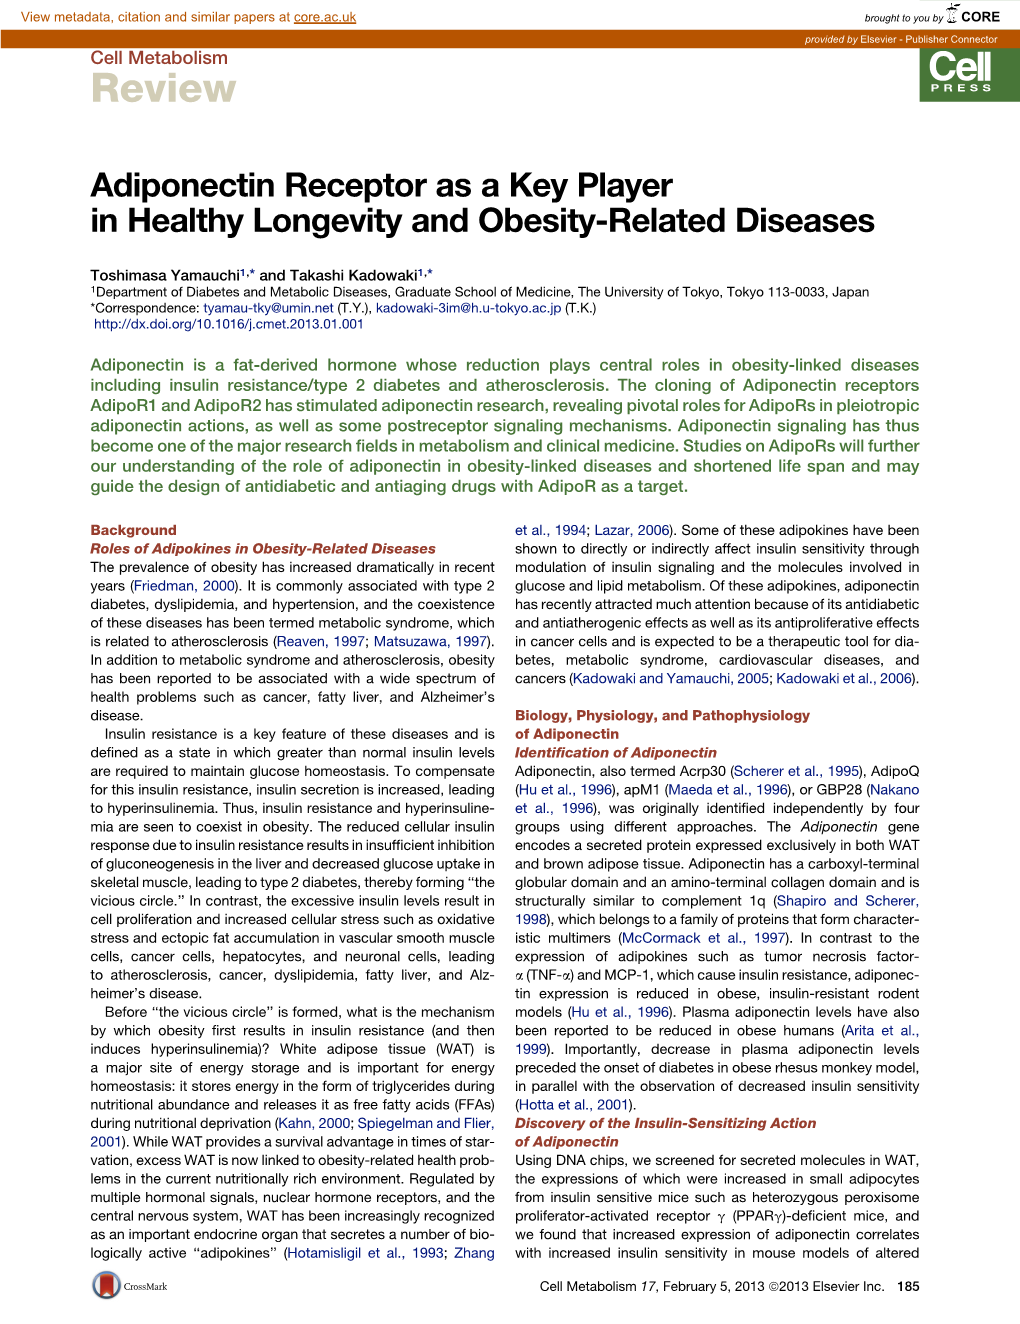 Adiponectin Receptor As a Key Player in Healthy Longevity and Obesity-Related Diseases